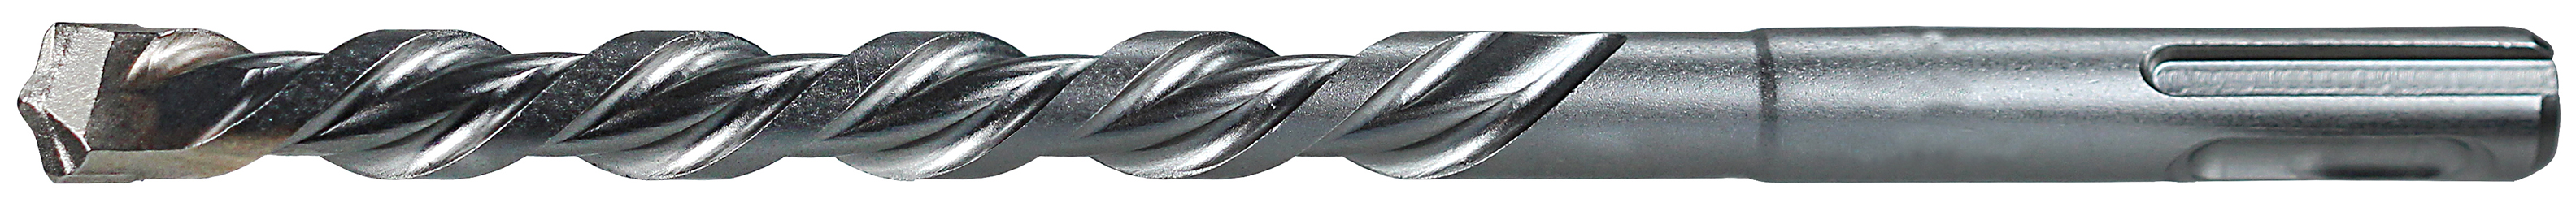 Rotary Hammer Drill Bit, 1/4 in. bit diameter, 11 in. overall length, Straight shank type, 3 flutes, Tip-Carbide material, 9 in. drilling depth